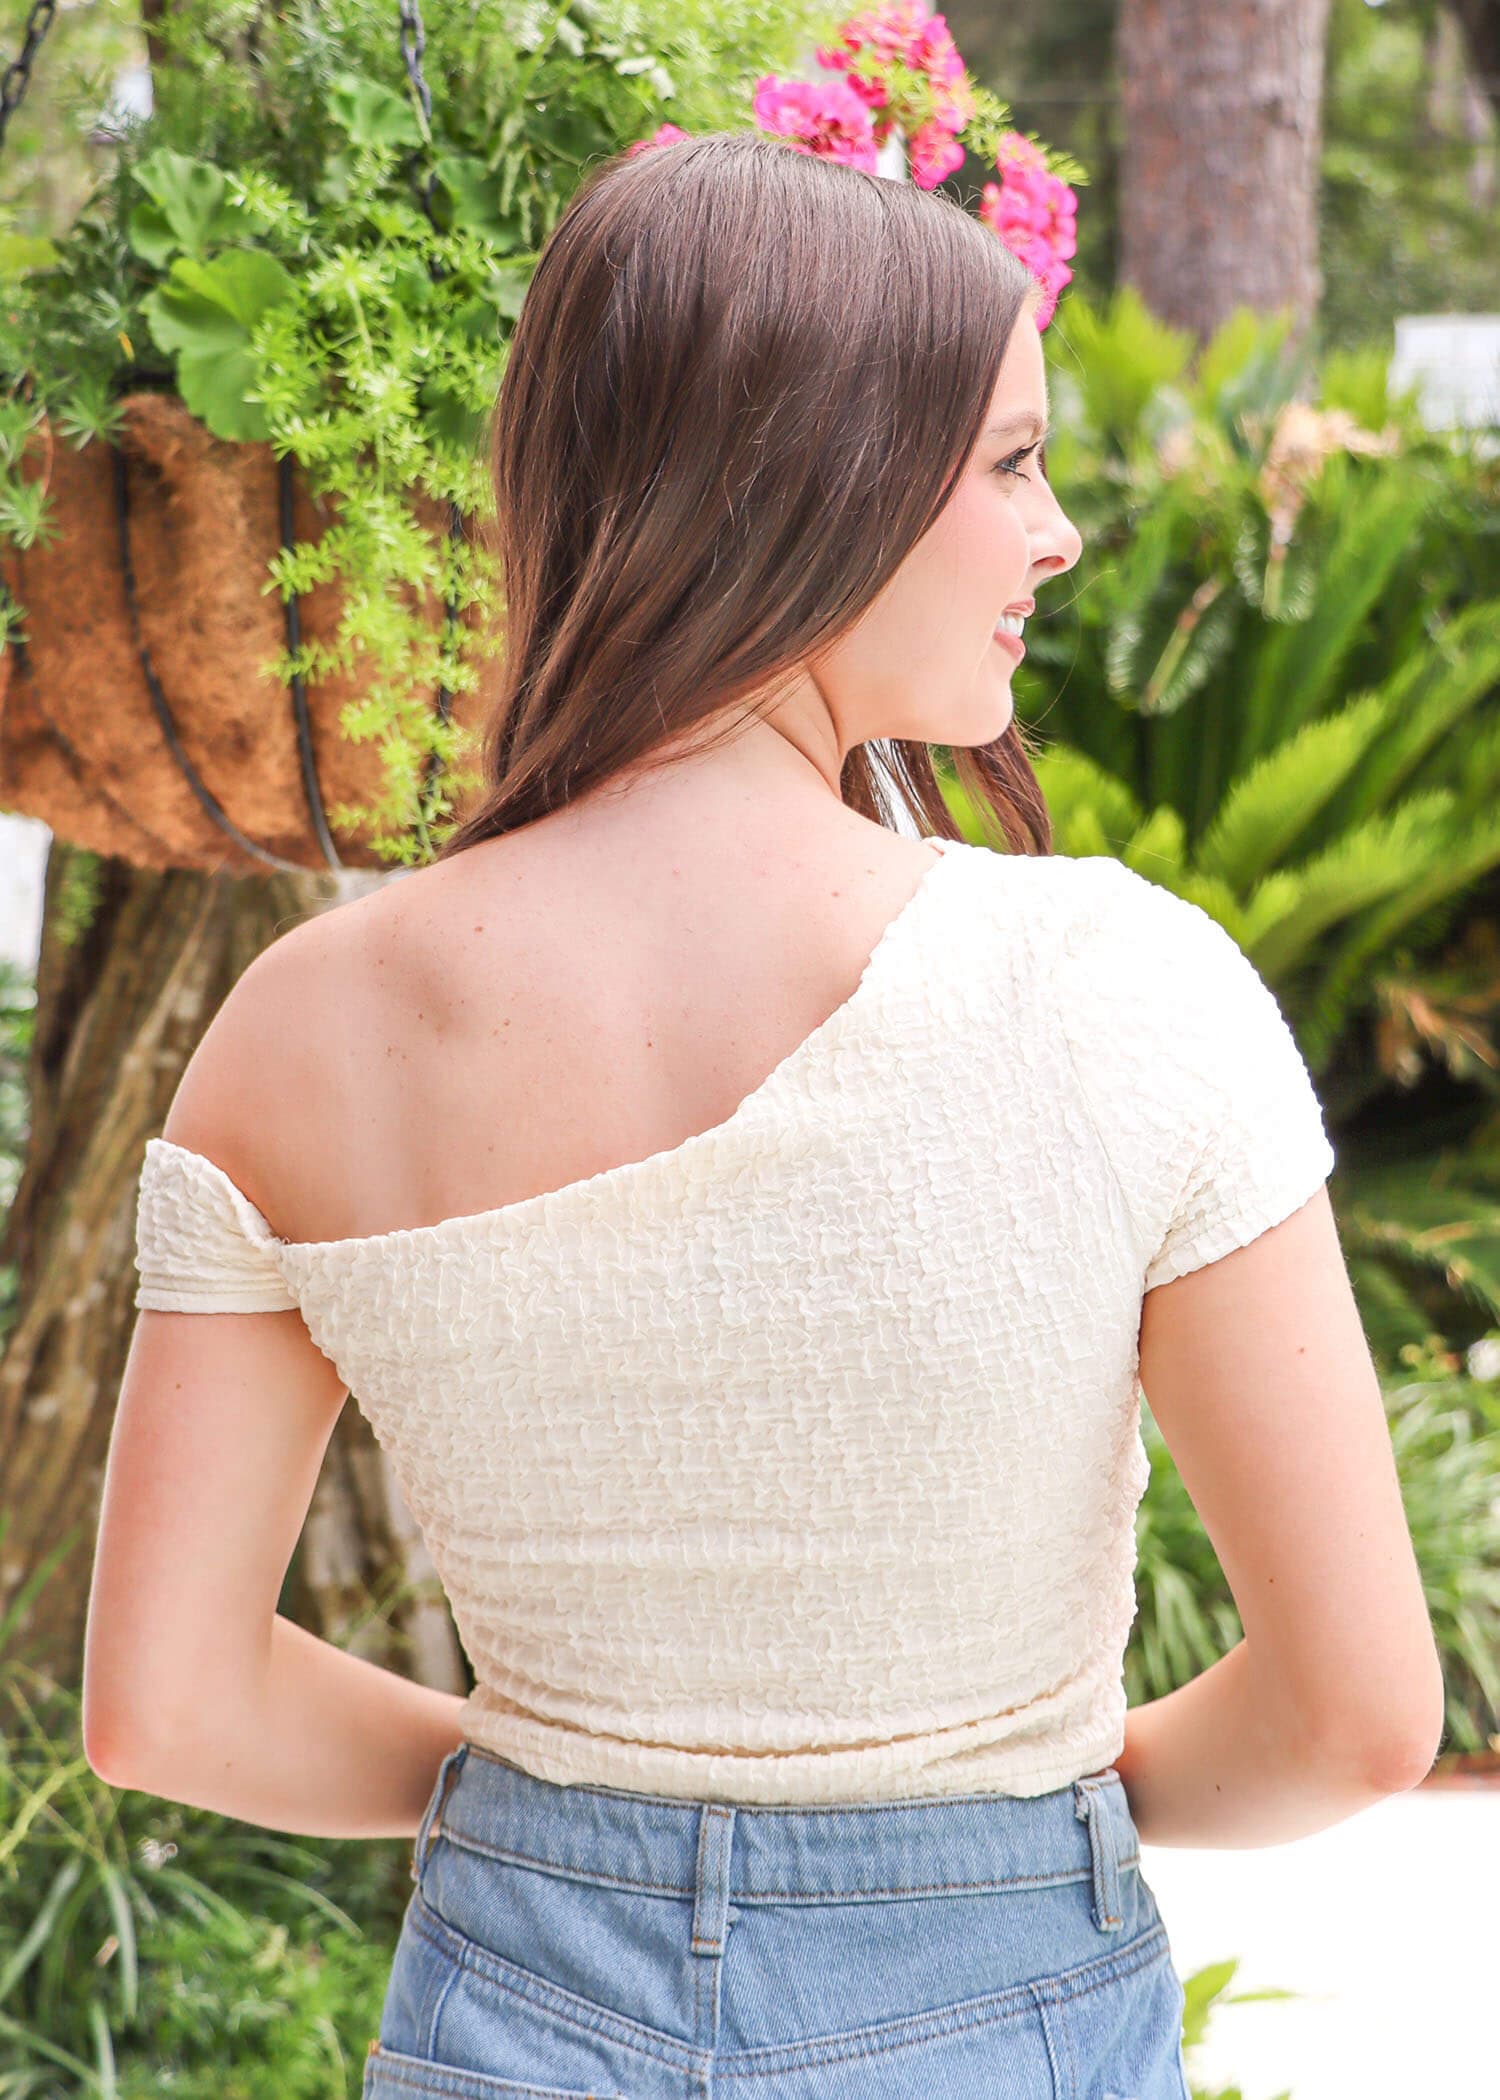 A New Favorite Top - Ivory Tops MerciGrace Boutique.